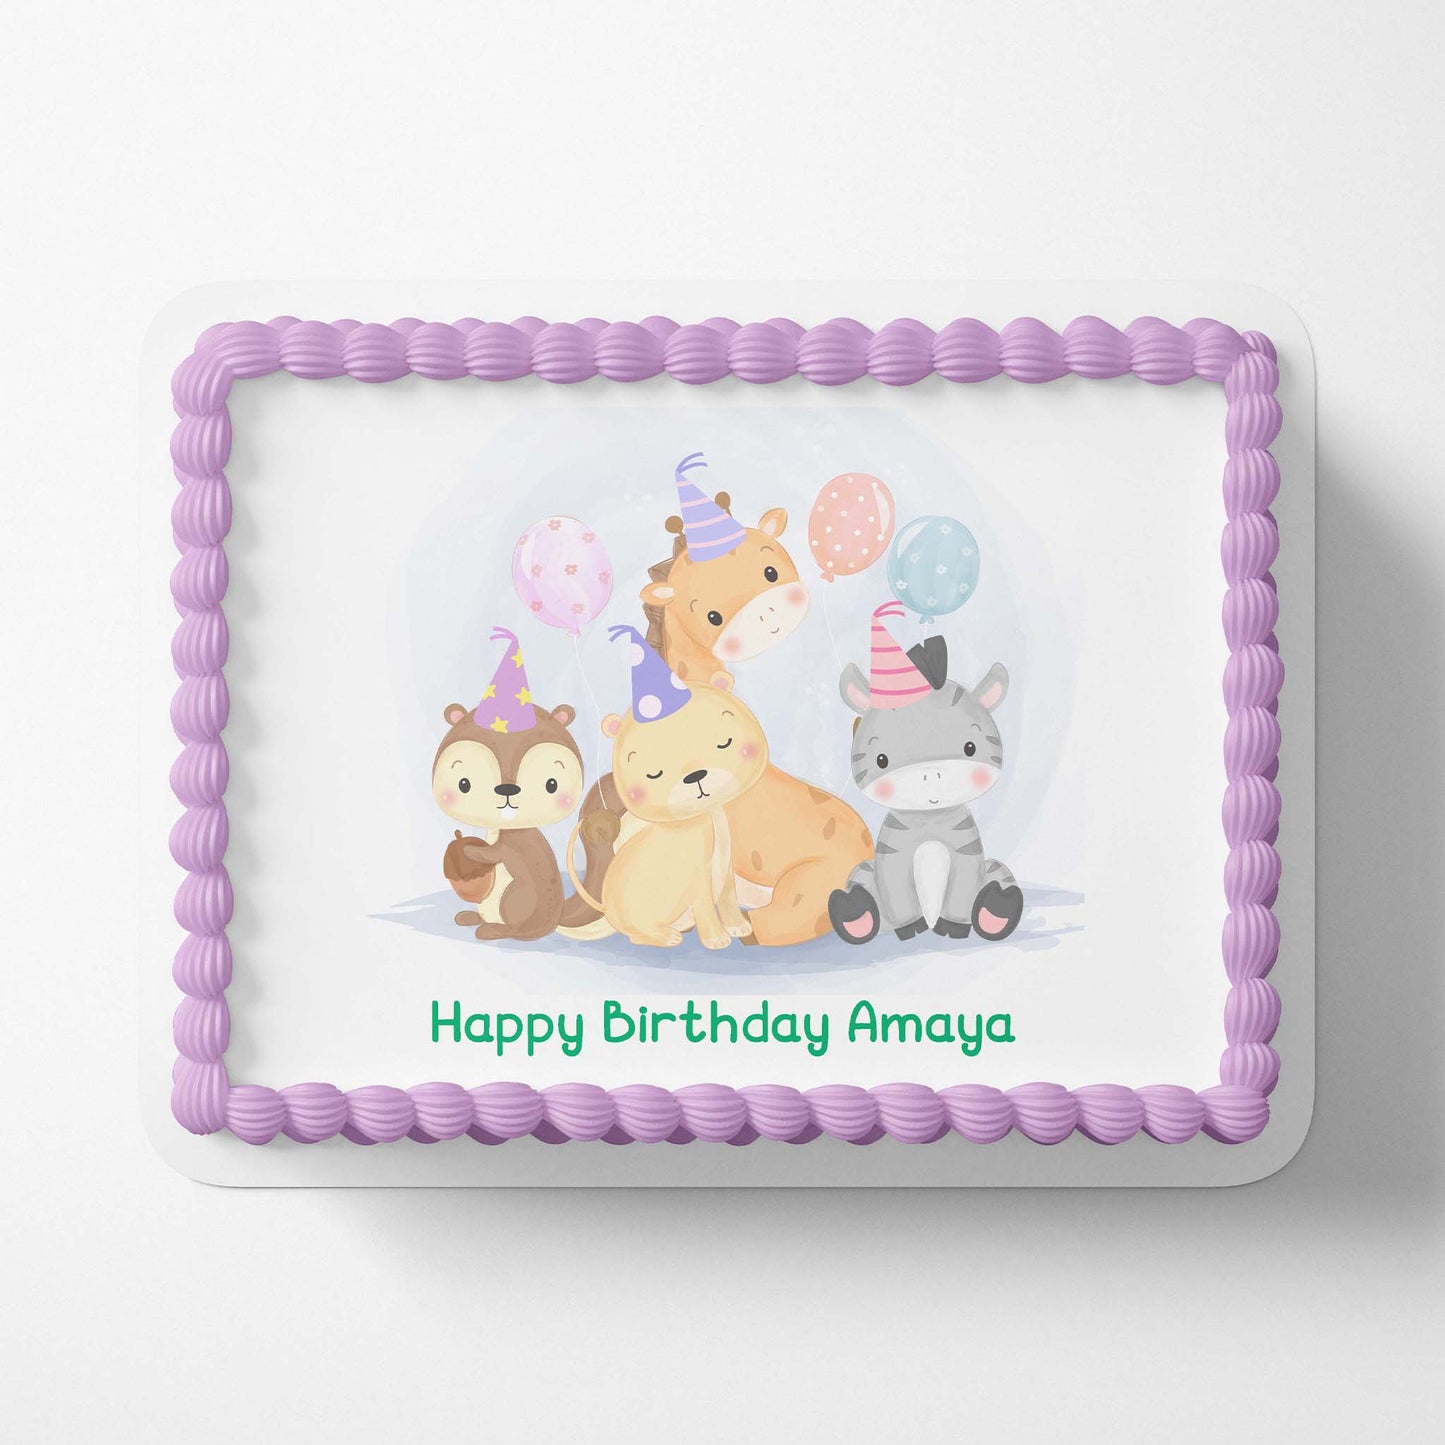 Cute Animals With Party Hats - Custom Edible Image toppers Edible Cake Topper, Edible Cake Image, Pre-designed edible icing image,printsoncakes